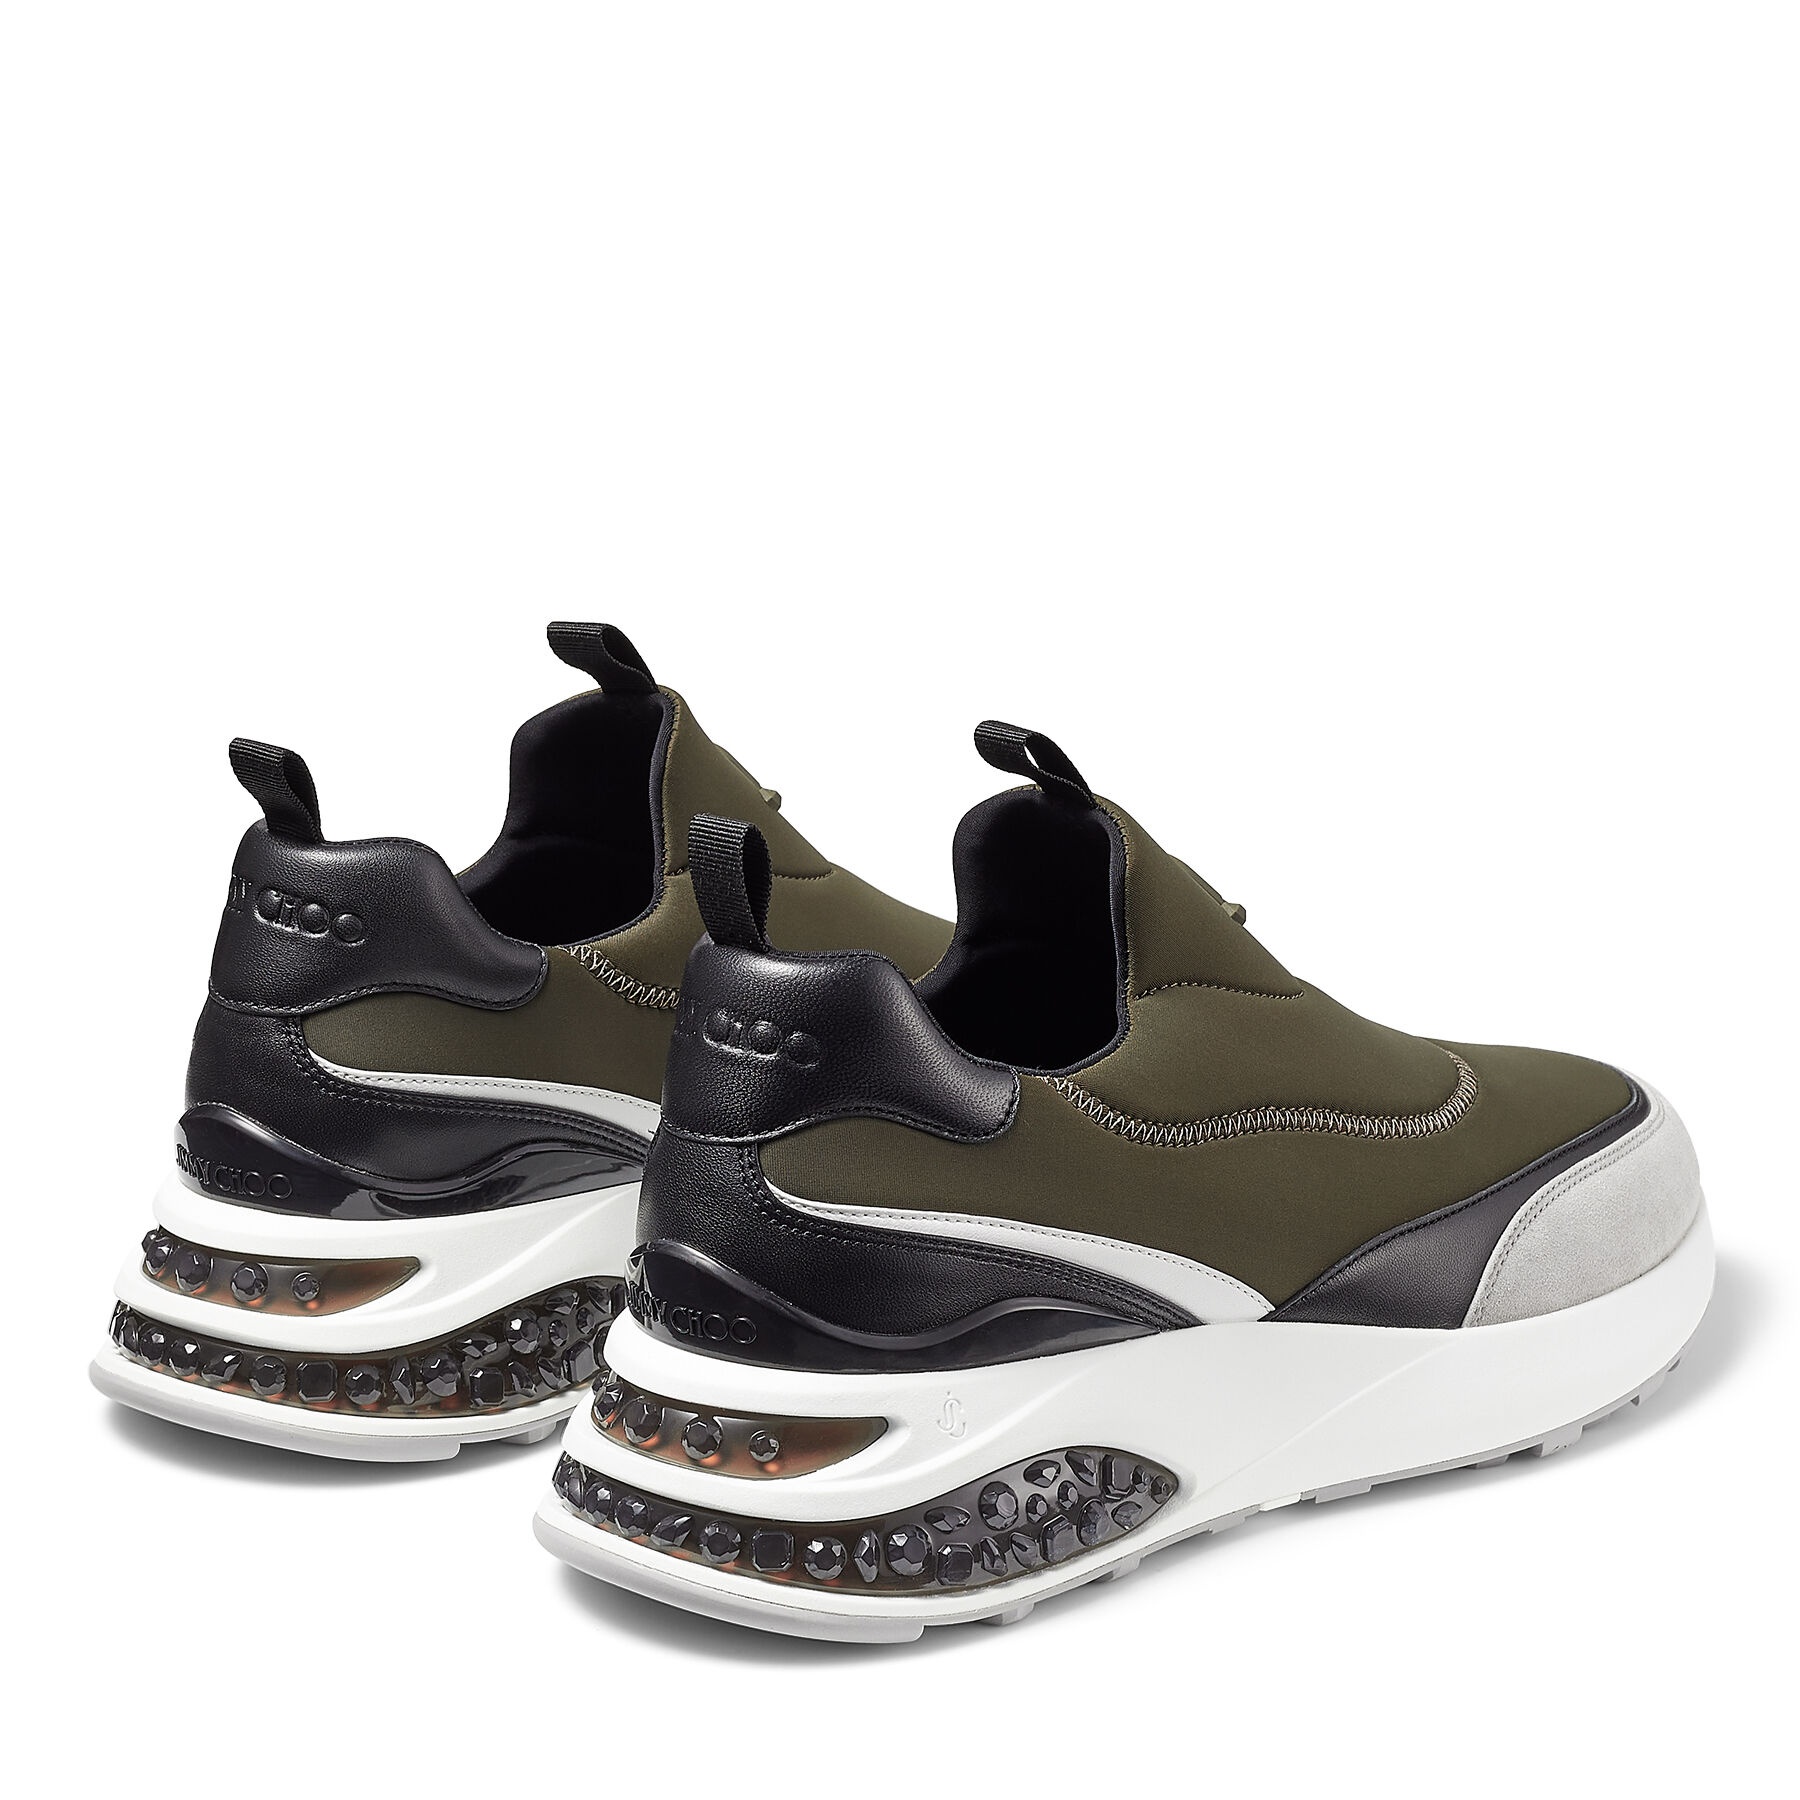 Memphis/m
Seaweed Neoprene and Leather Low Top Trainers - 4